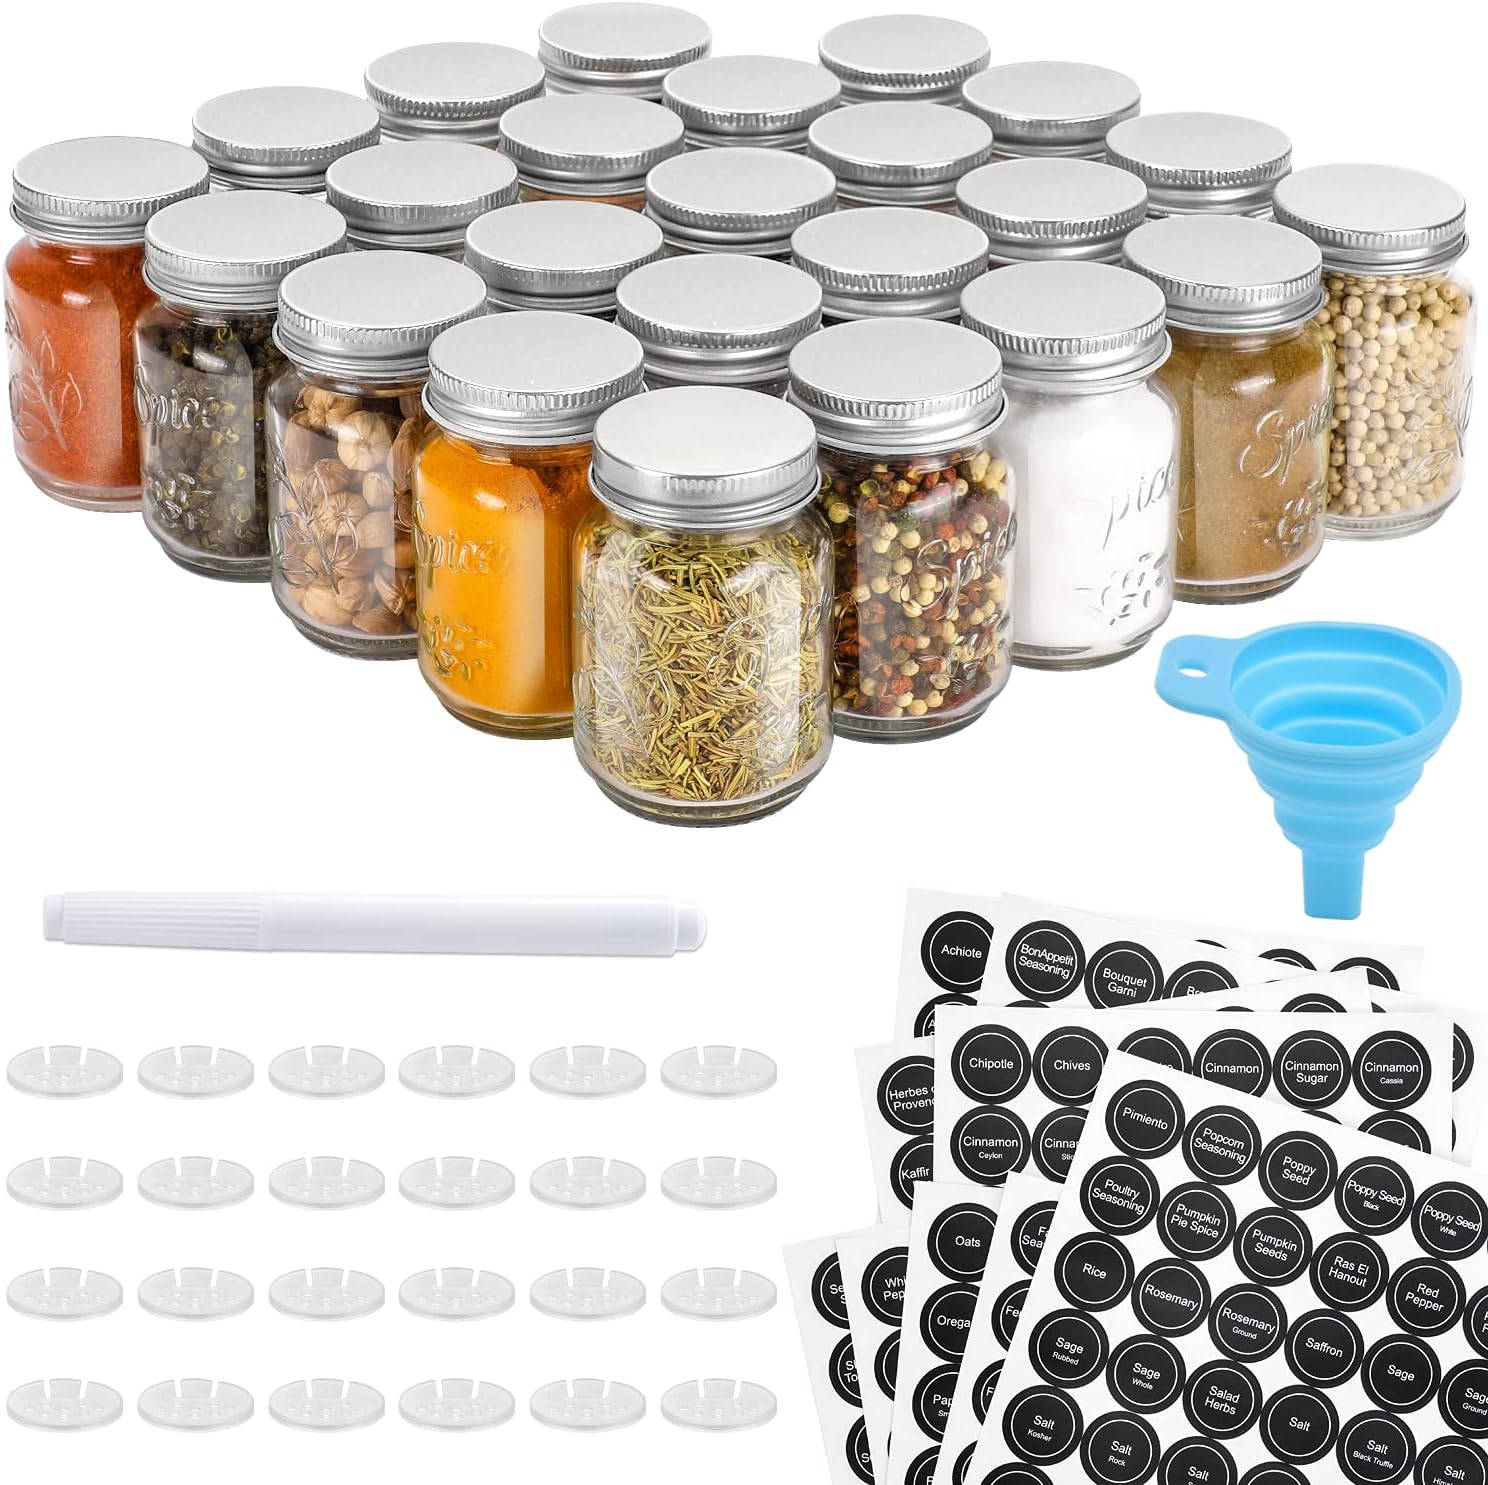 Aozita 24 Pcs Glass Mason Spice Jars/Bottles - 4oz Empty Spice Containers with Spice Labels - Shaker Lids and Airtight Metal